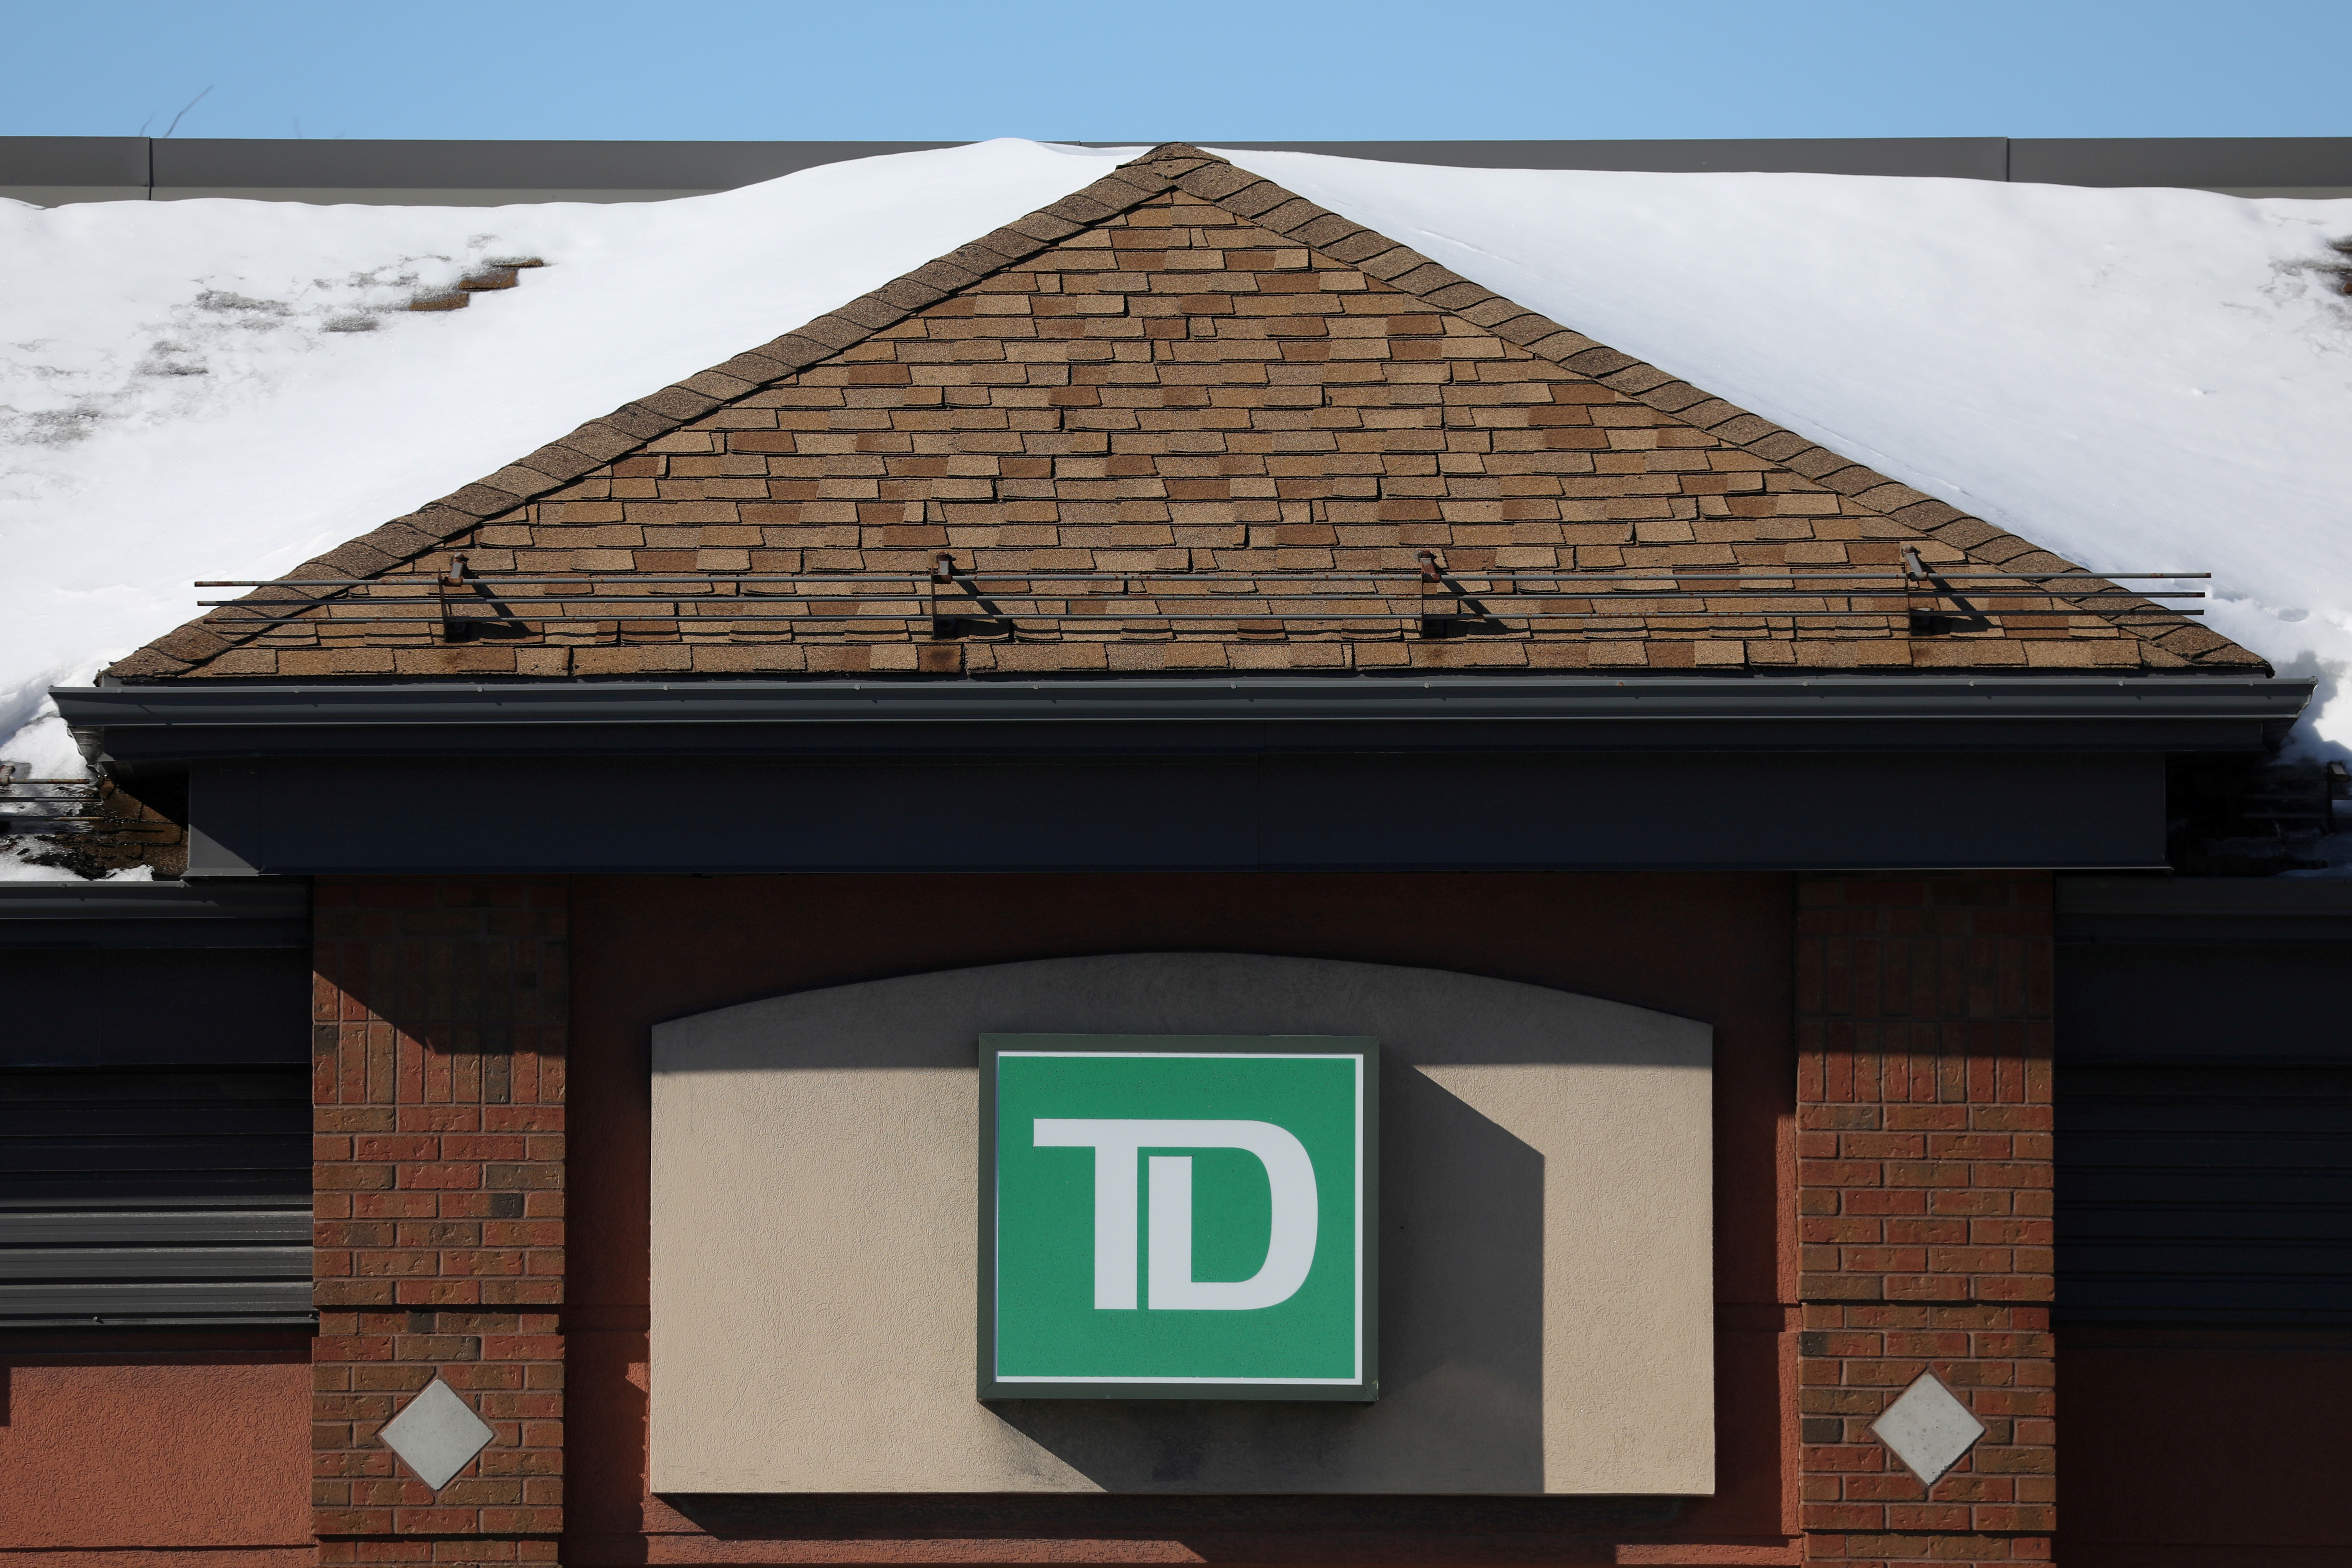 The Toronto-Dominion (TD) bank logo is seen outside of a branch in Ottawa, Ontario, Canada, February 14, 2019. REUTERS/Chris Wattie